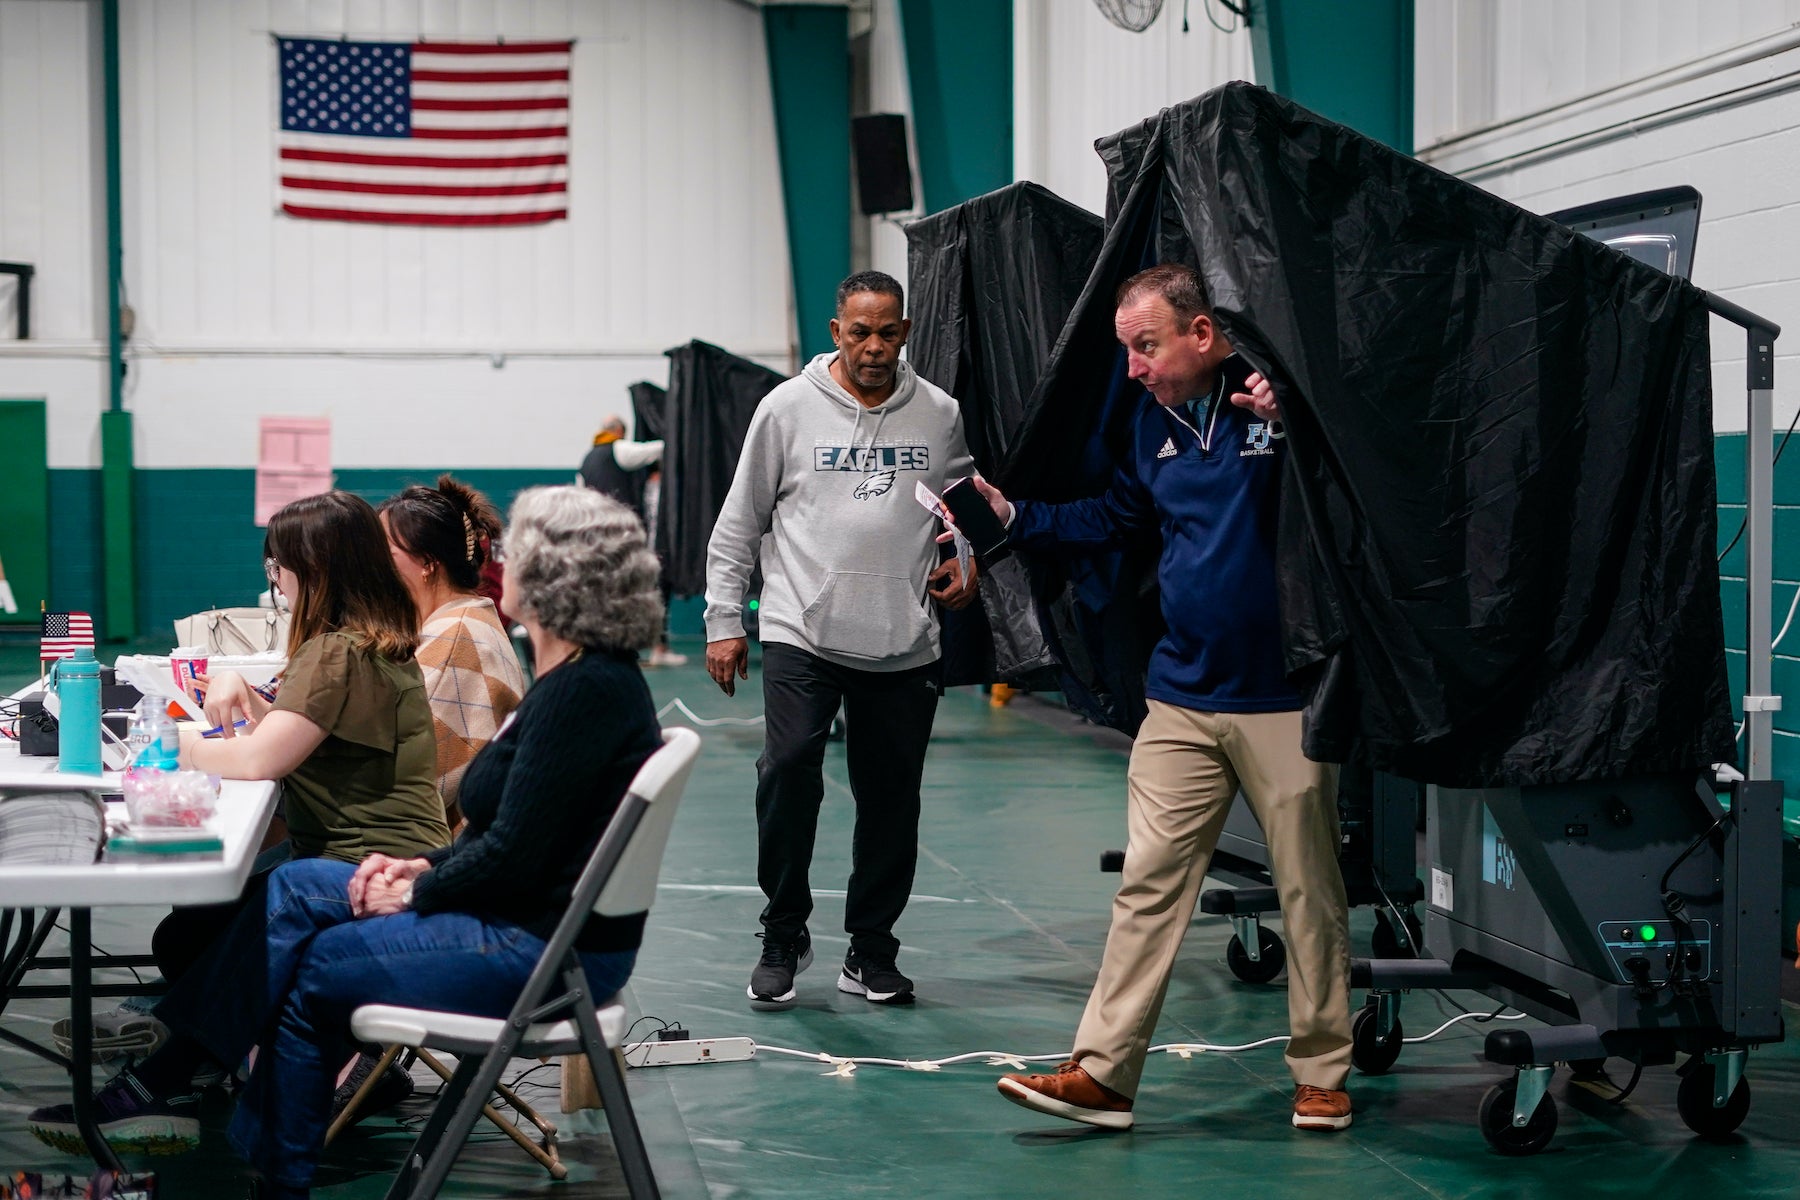 Voting machines in one Pennsylvania county flip votes for judges, an error to be fixed in tabulation